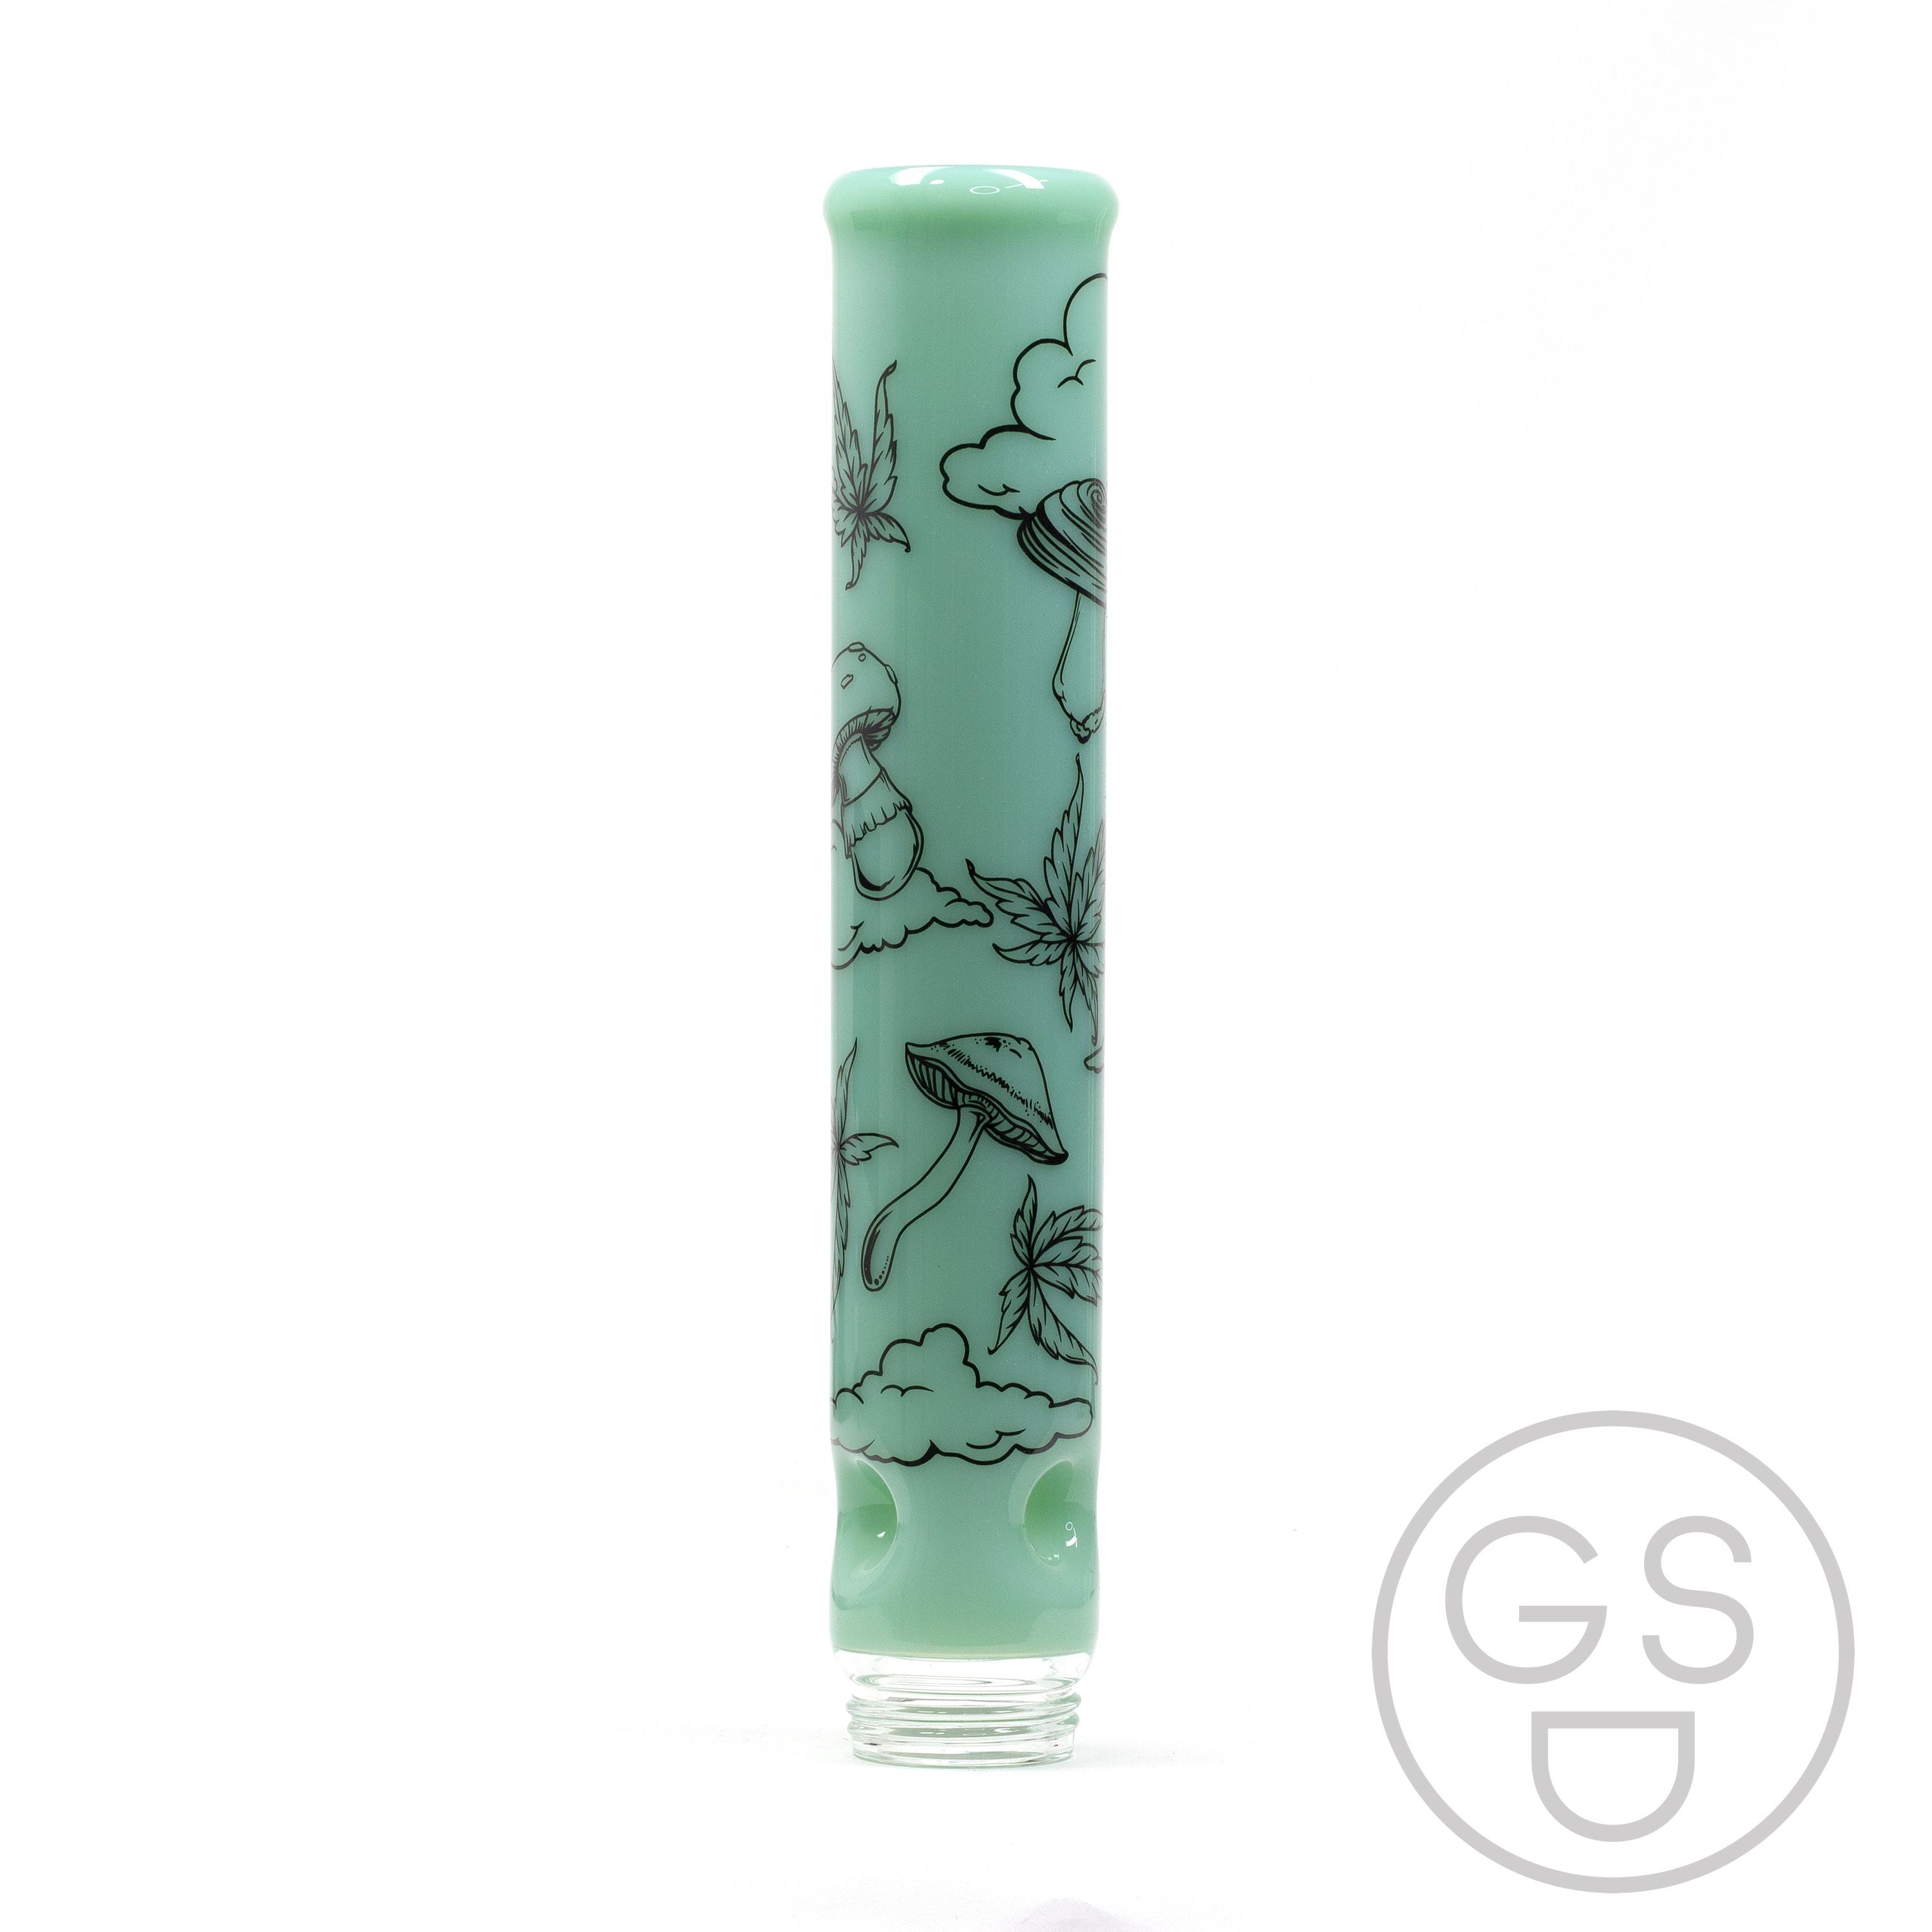 Prism Modular Waterpipe Tall Mouthpiece - Sky High / Mint